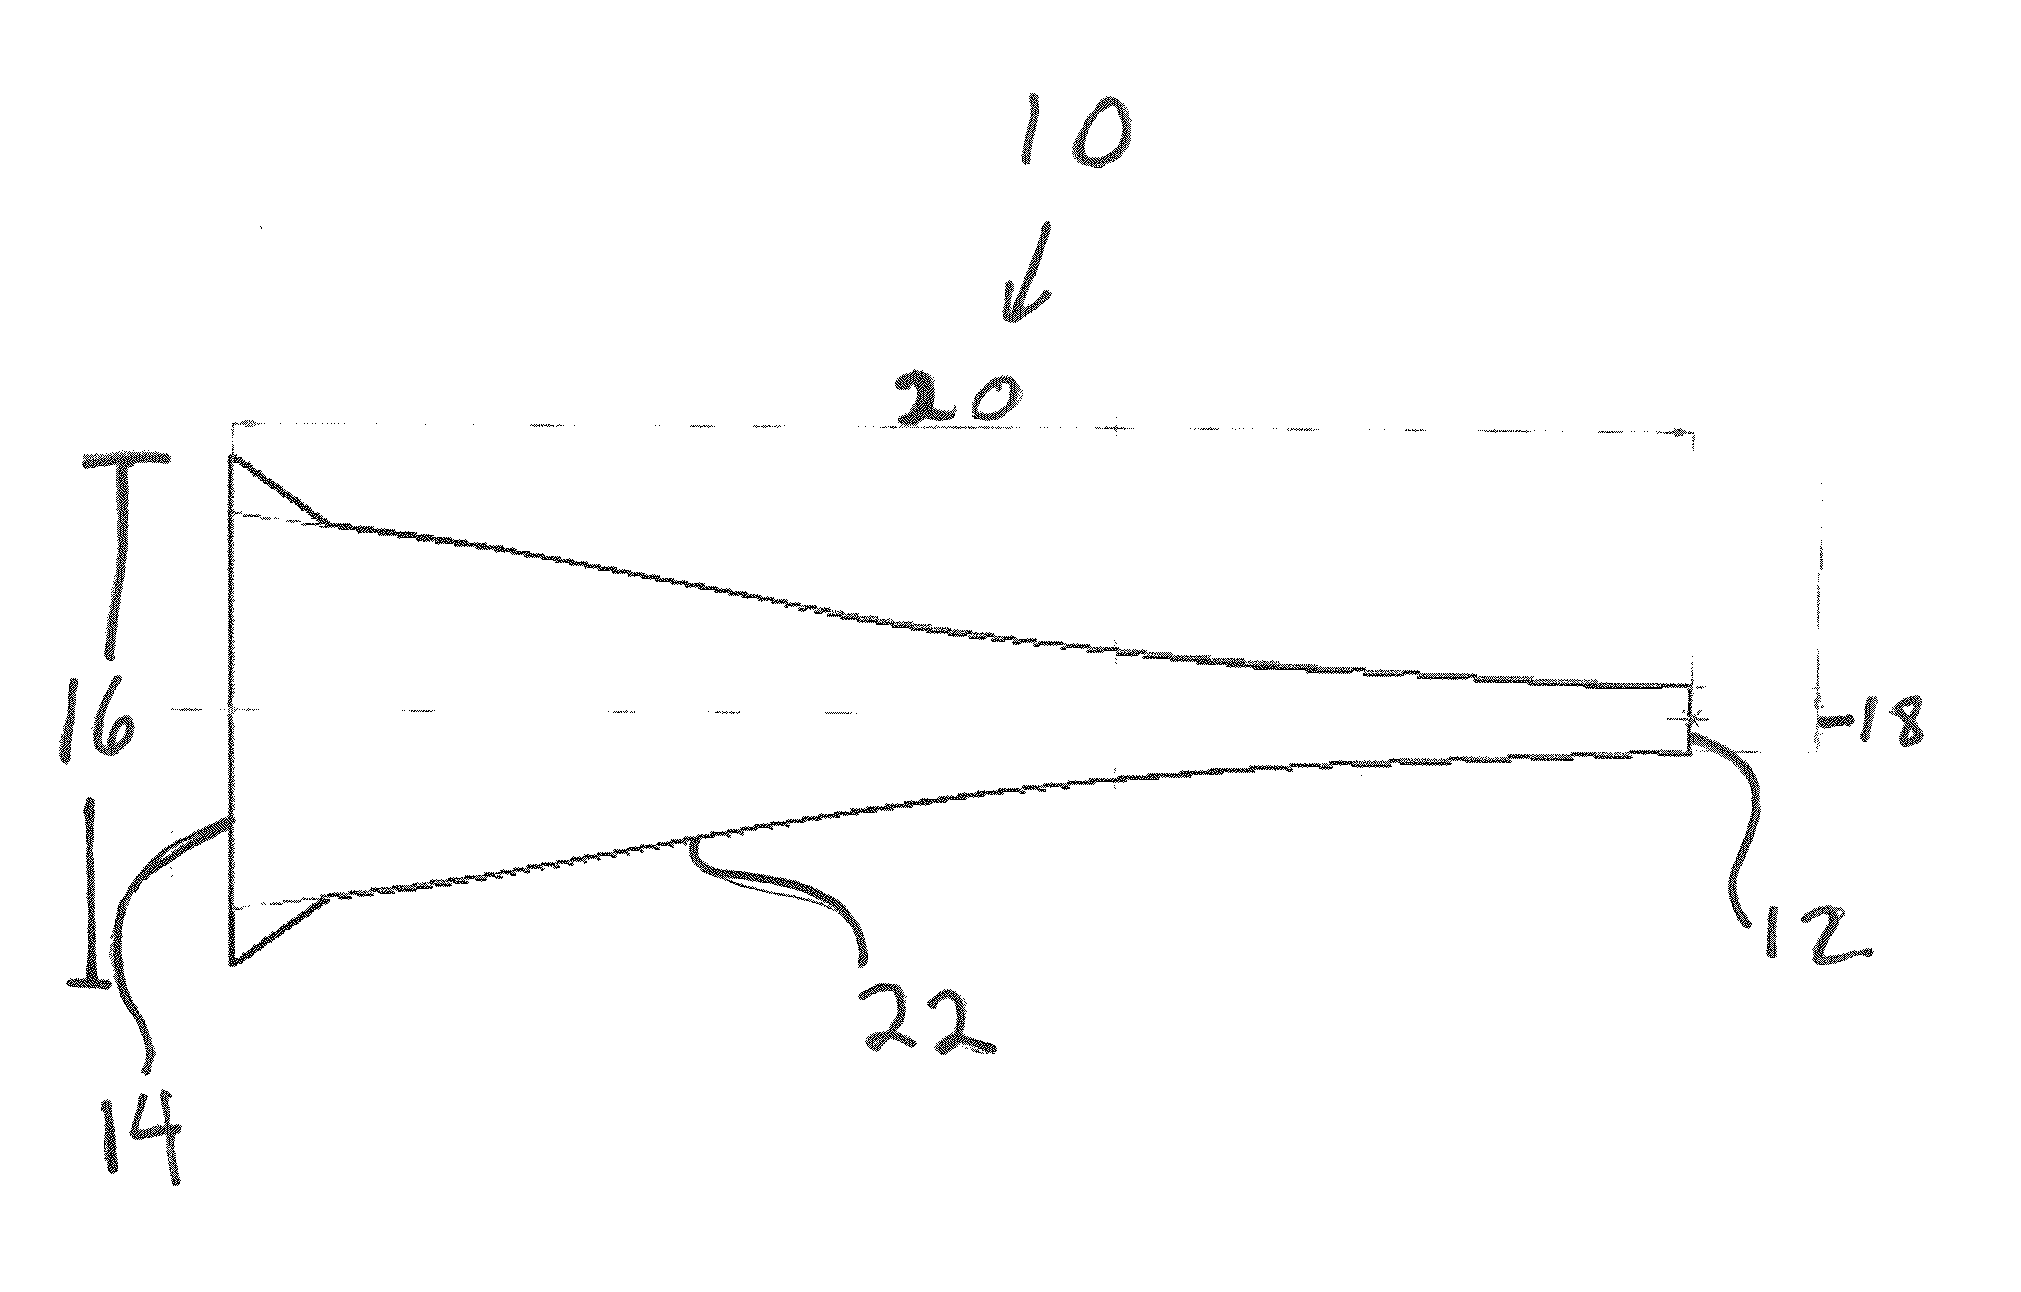 Compact broad-band admittance tunnel incorporating Gaussian beam antennas